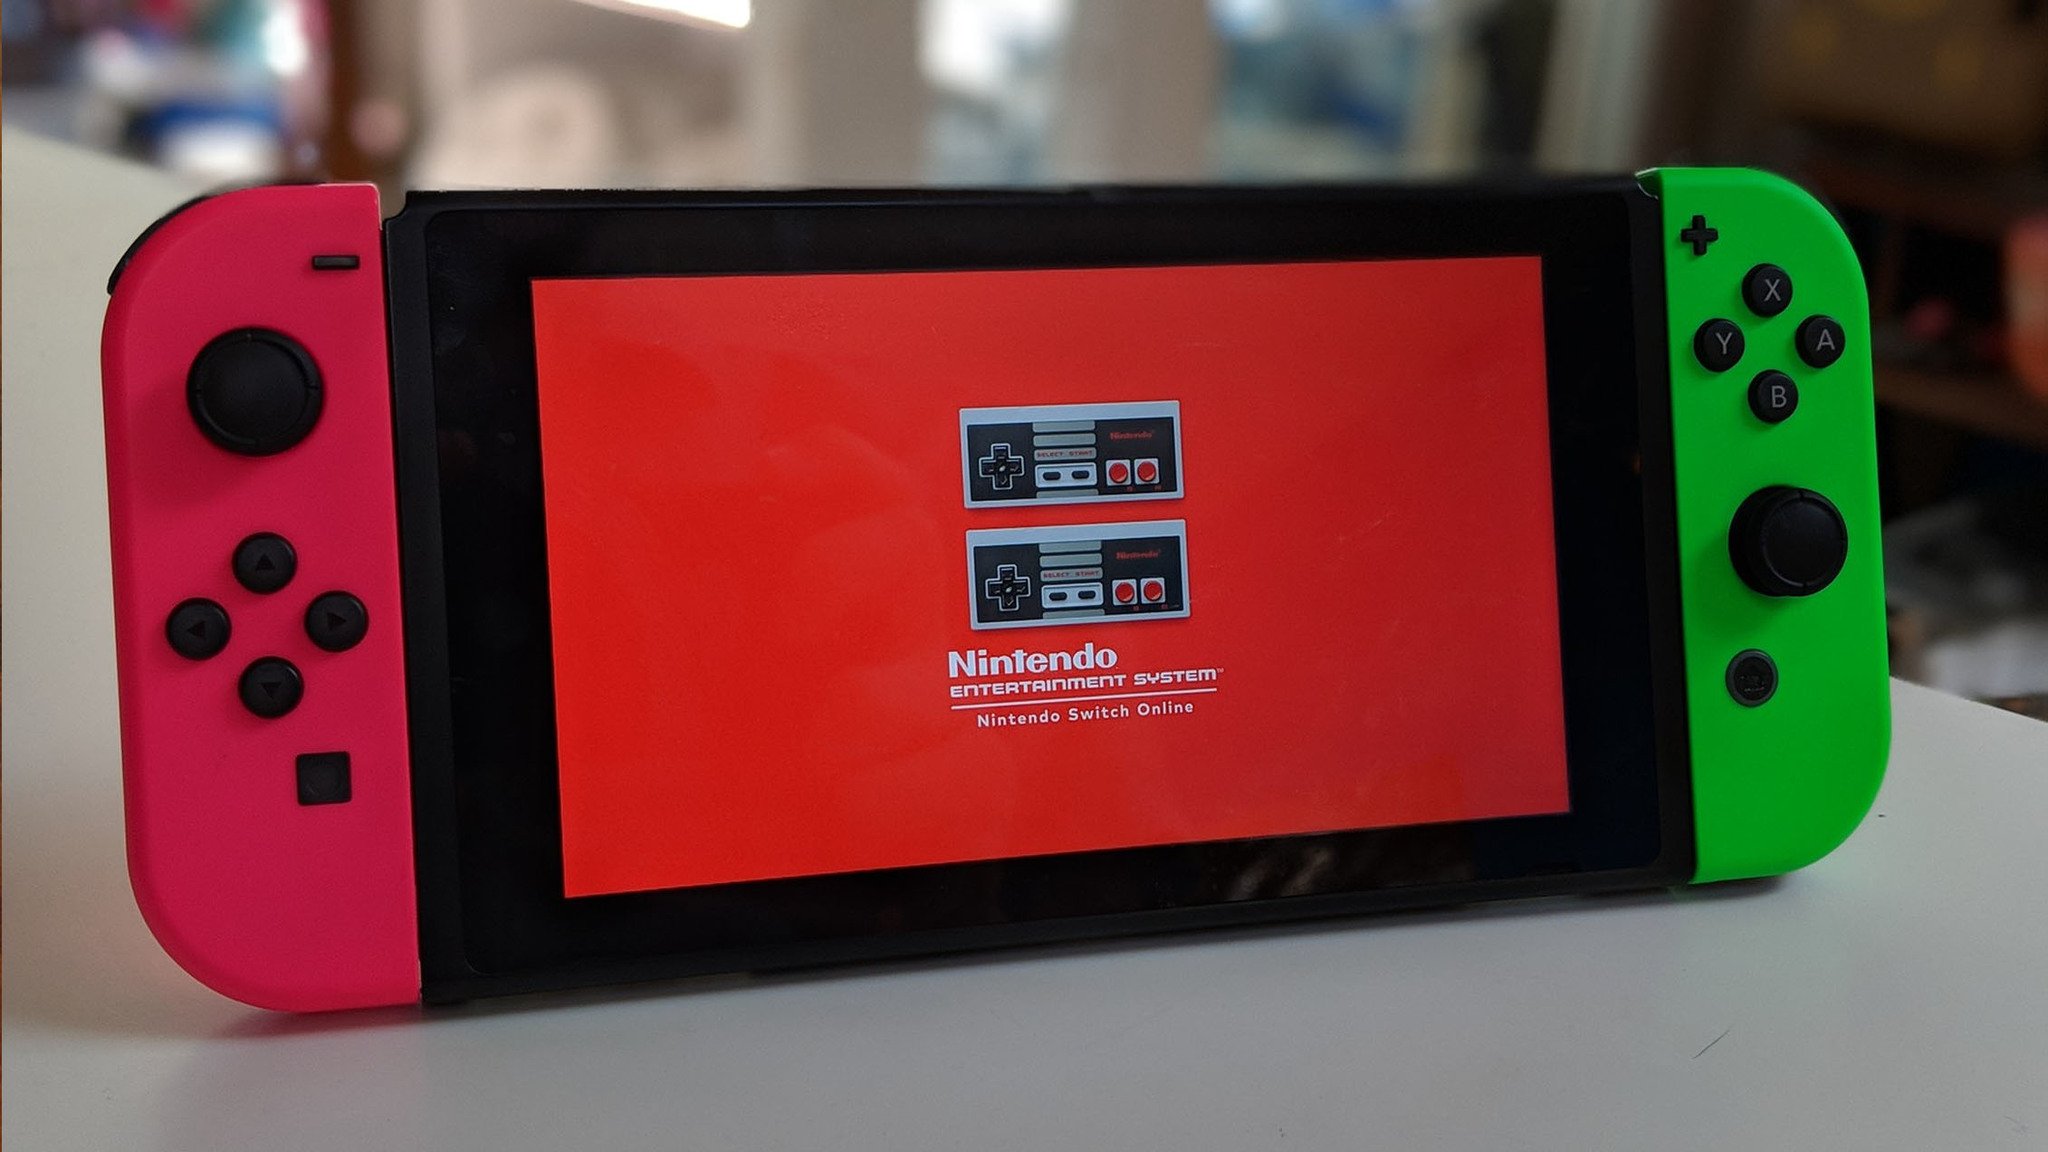 afskaffe Phobia smart Beginner's Guide: How to set up and start using your Nintendo Switch | iMore